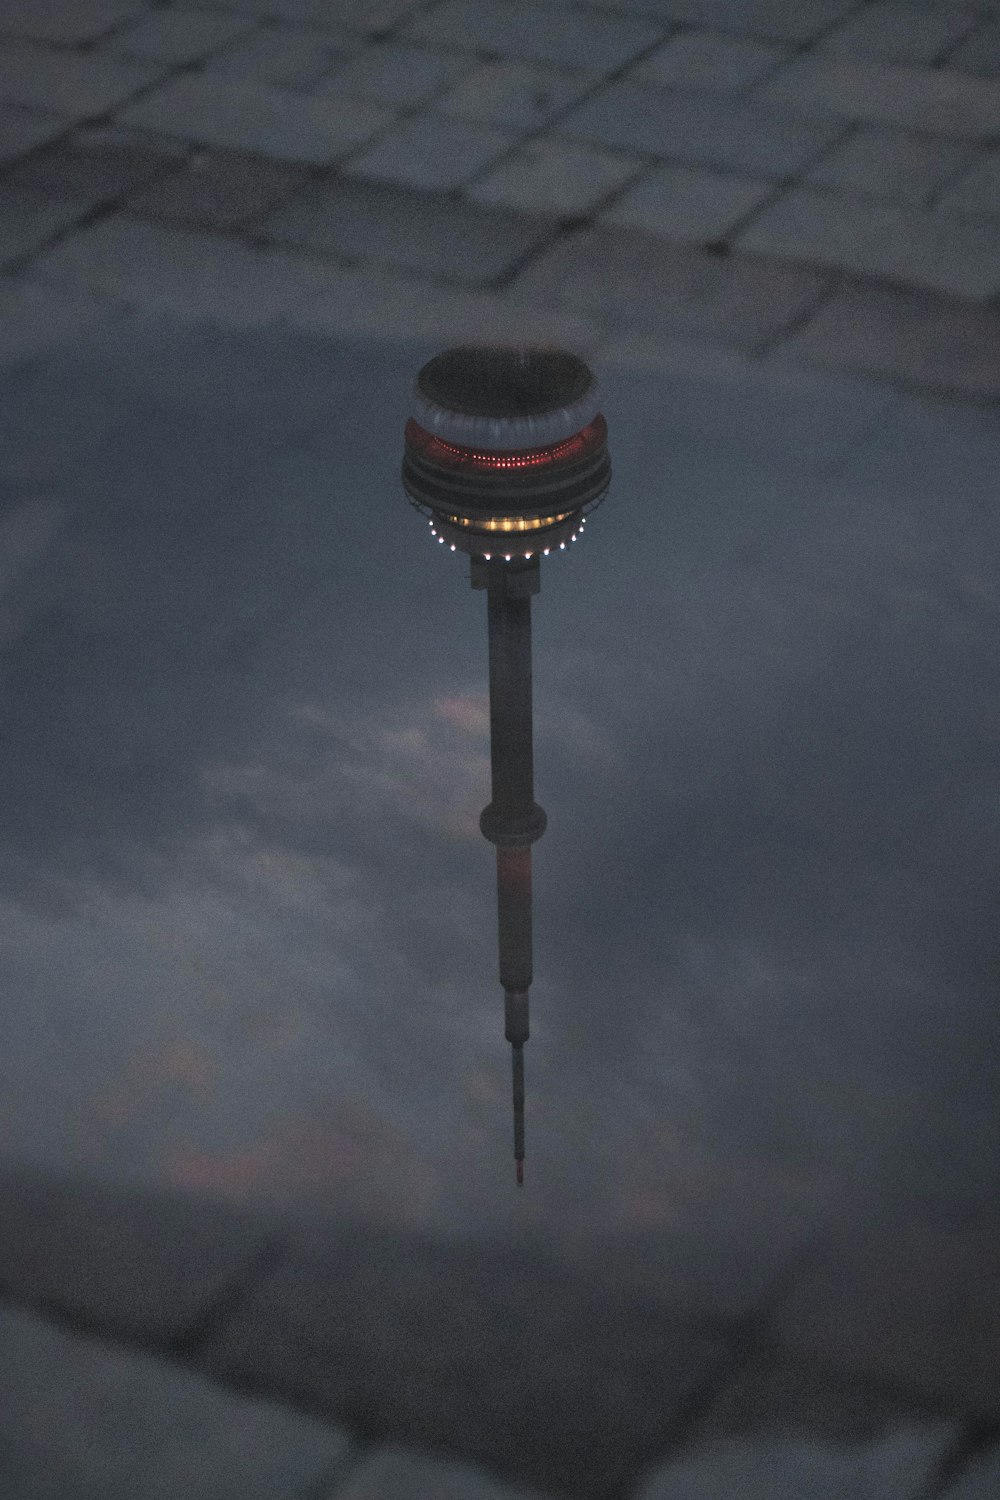 CN tower reflection on water